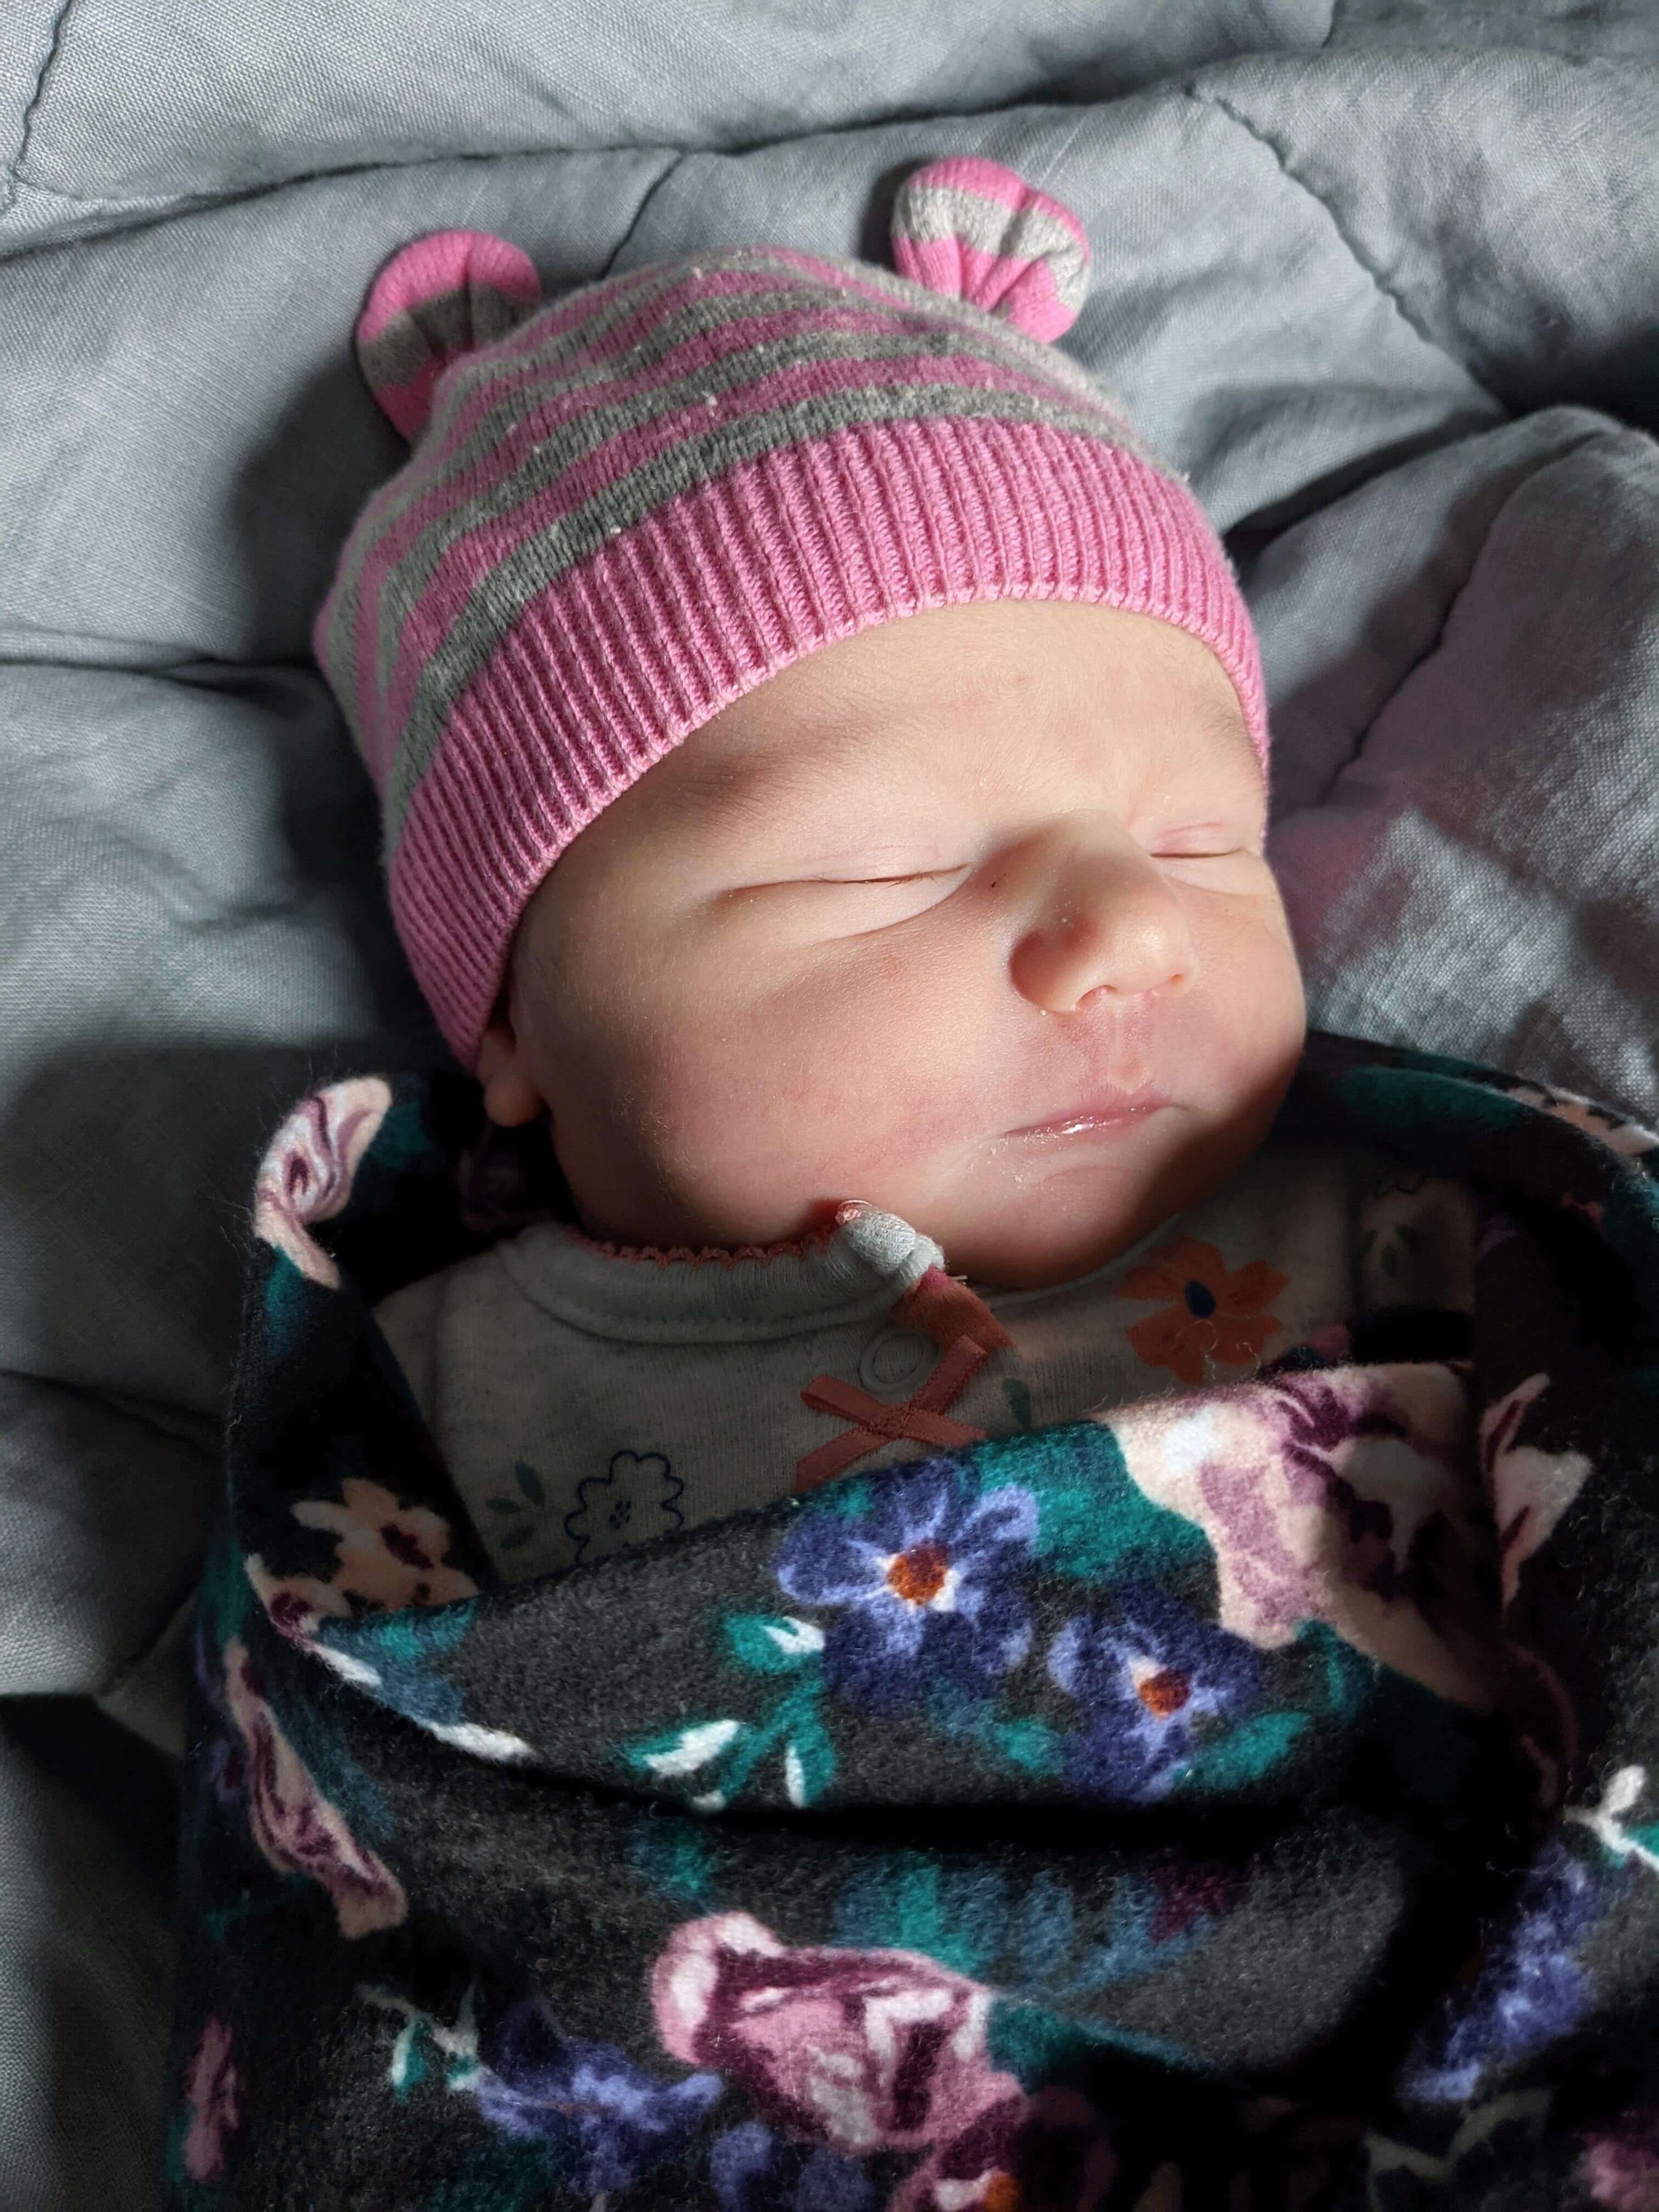 Selah Bloom, our fourth baby